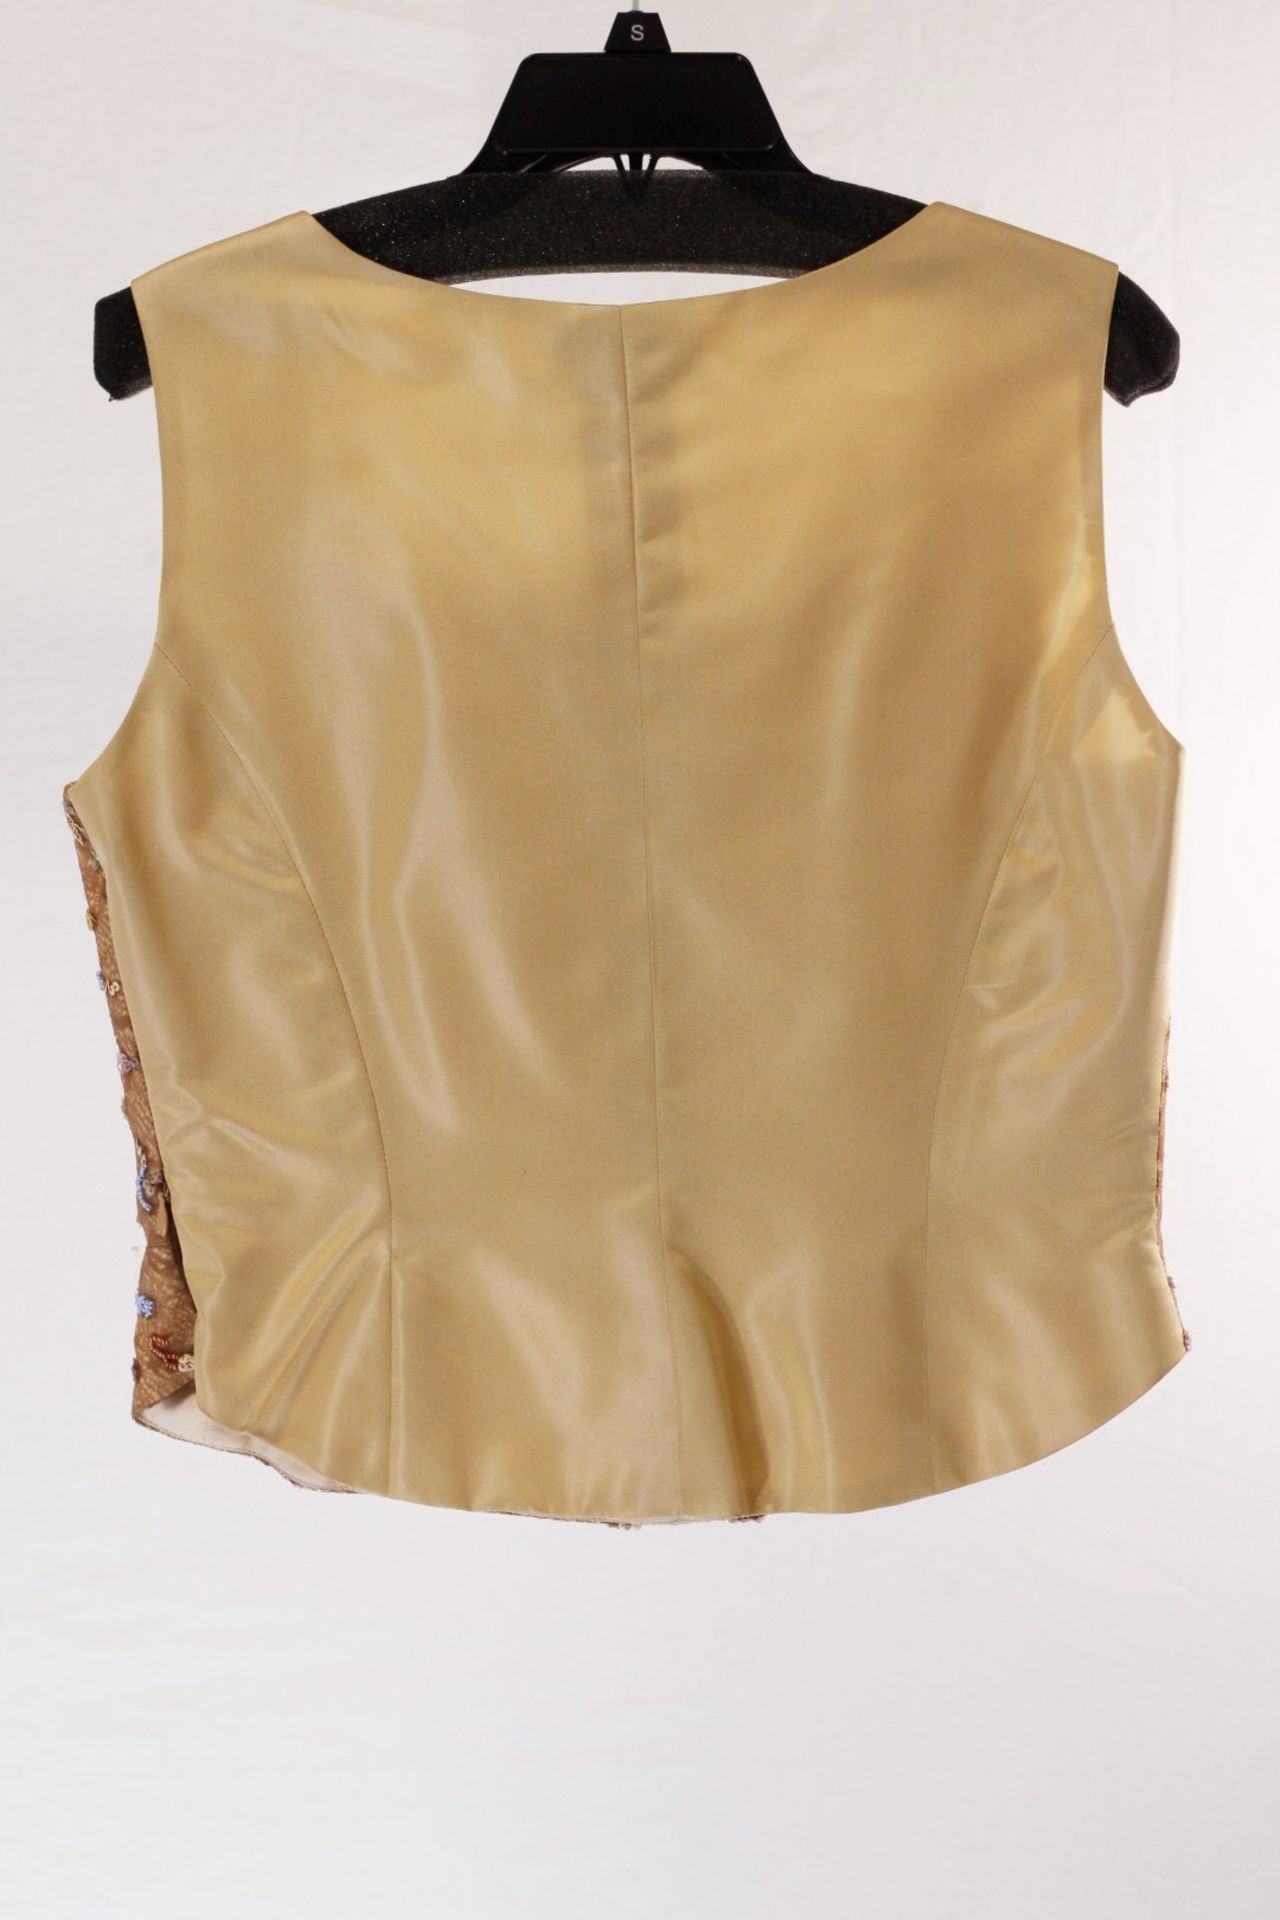 1 x Anne Belin Gold Sequence Vest - Size: 14 - Material: 100% Nylon - From a High End Clothing - Image 3 of 8